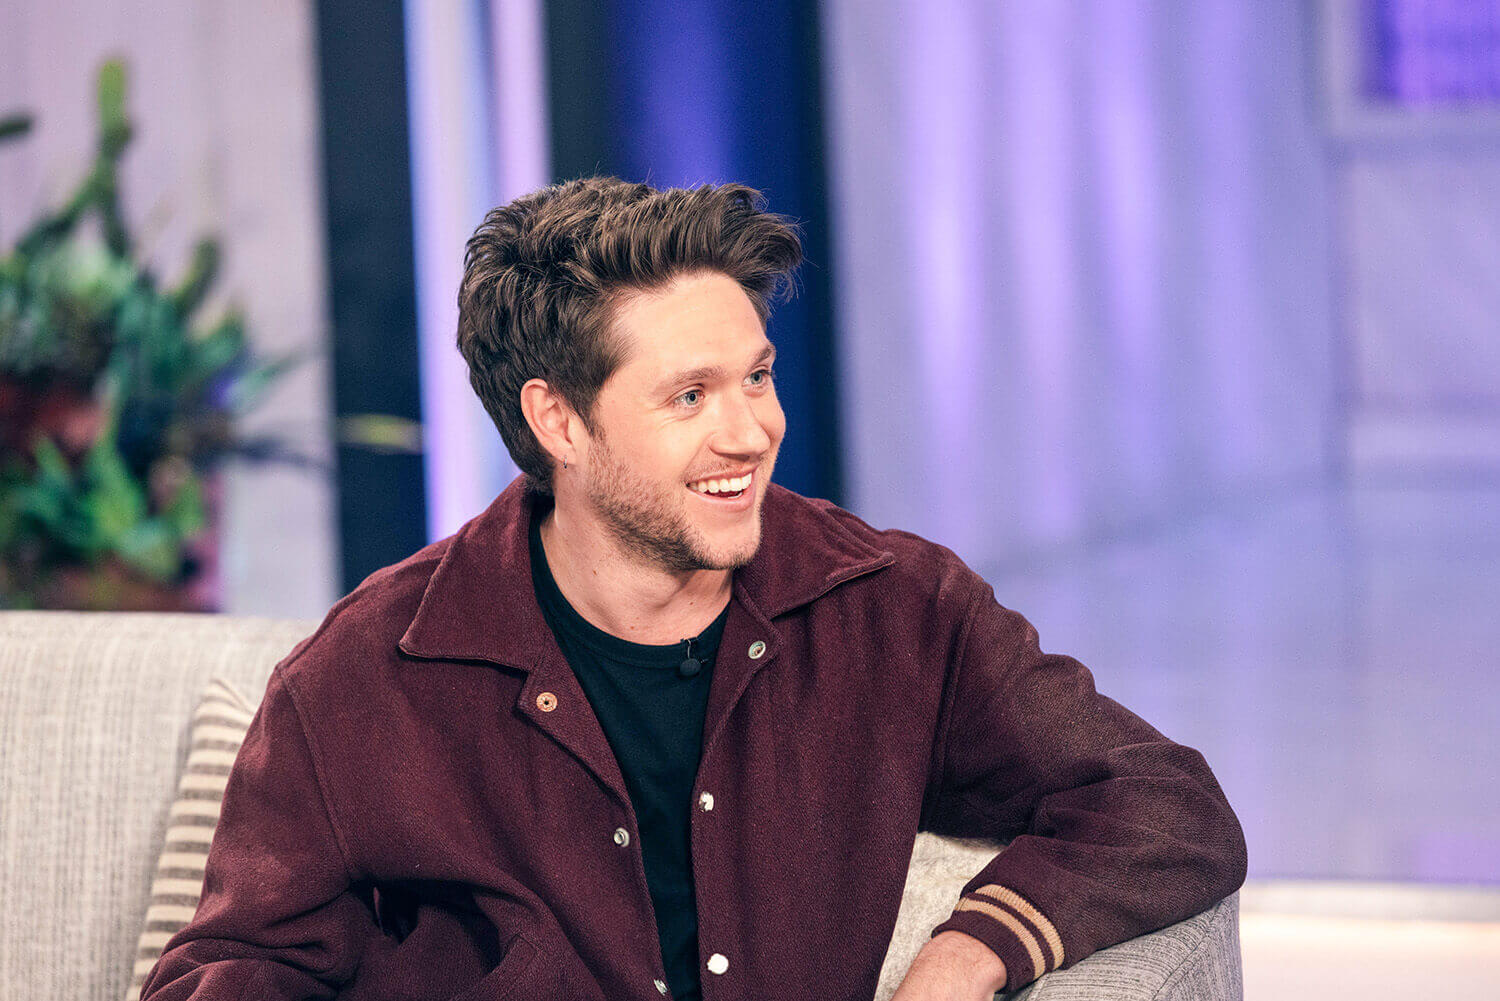 Niall Horan smiles in his seat on The Kelly Clarkson Show, where he and Clarkson discussed The Voice and his time on The X Factor.